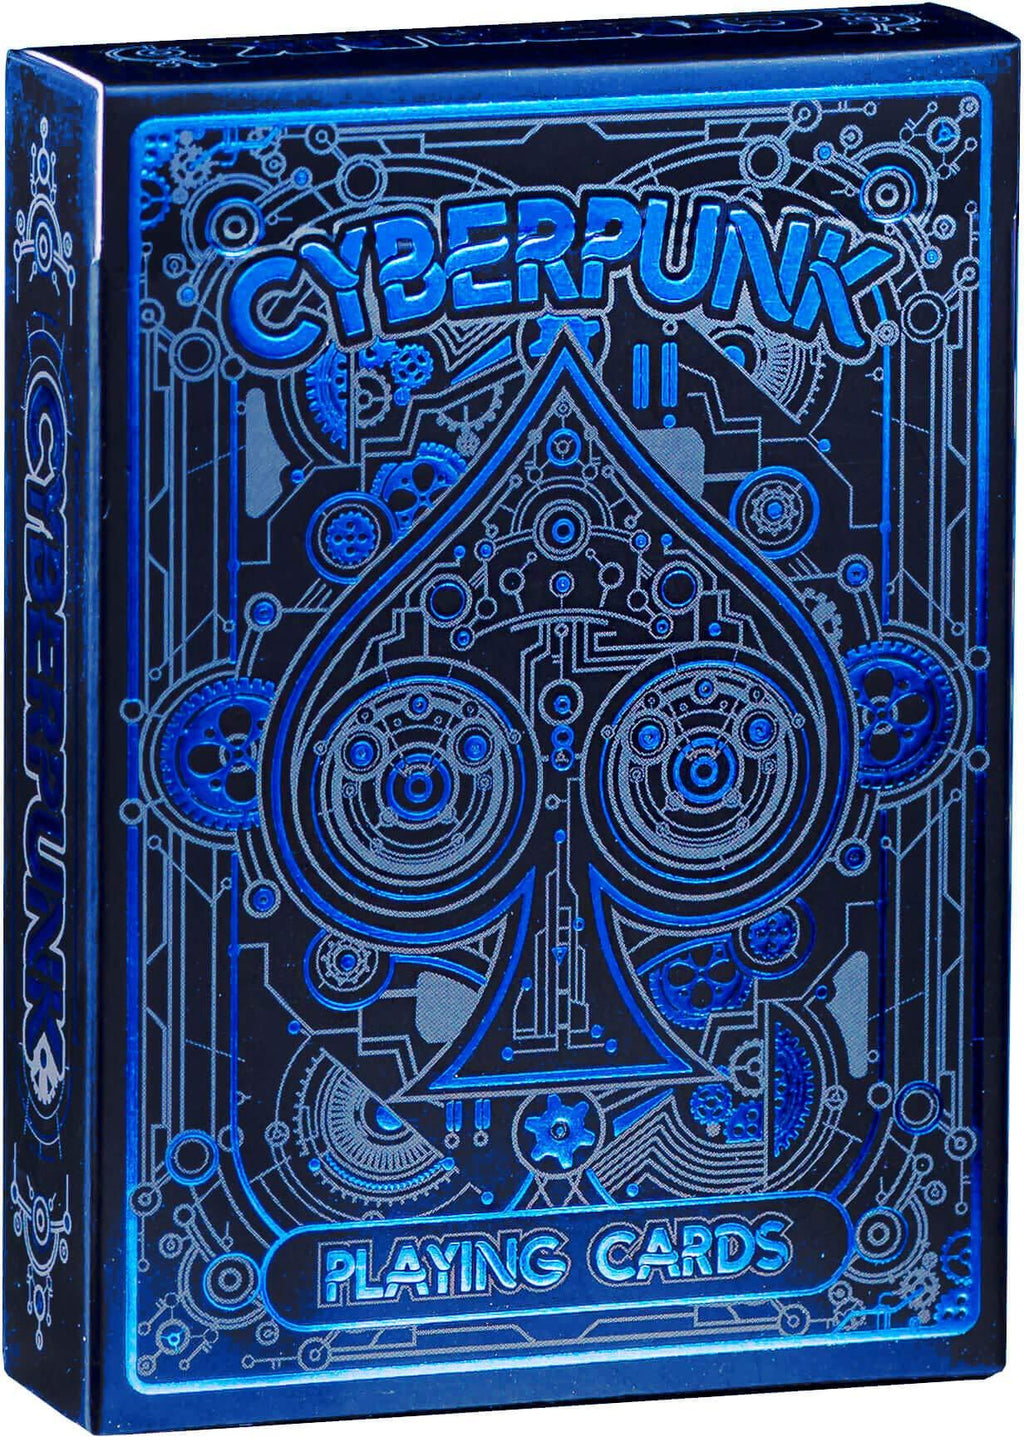 Cyberpunk Blue Playing Cards, Deck of Cards with Free Card Game eBook, Premium Card Deck, Cool Poker Cards, Unique Bright Colors for Kids & Adults, Card Decks Games, Standard Size - BeesActive Australia